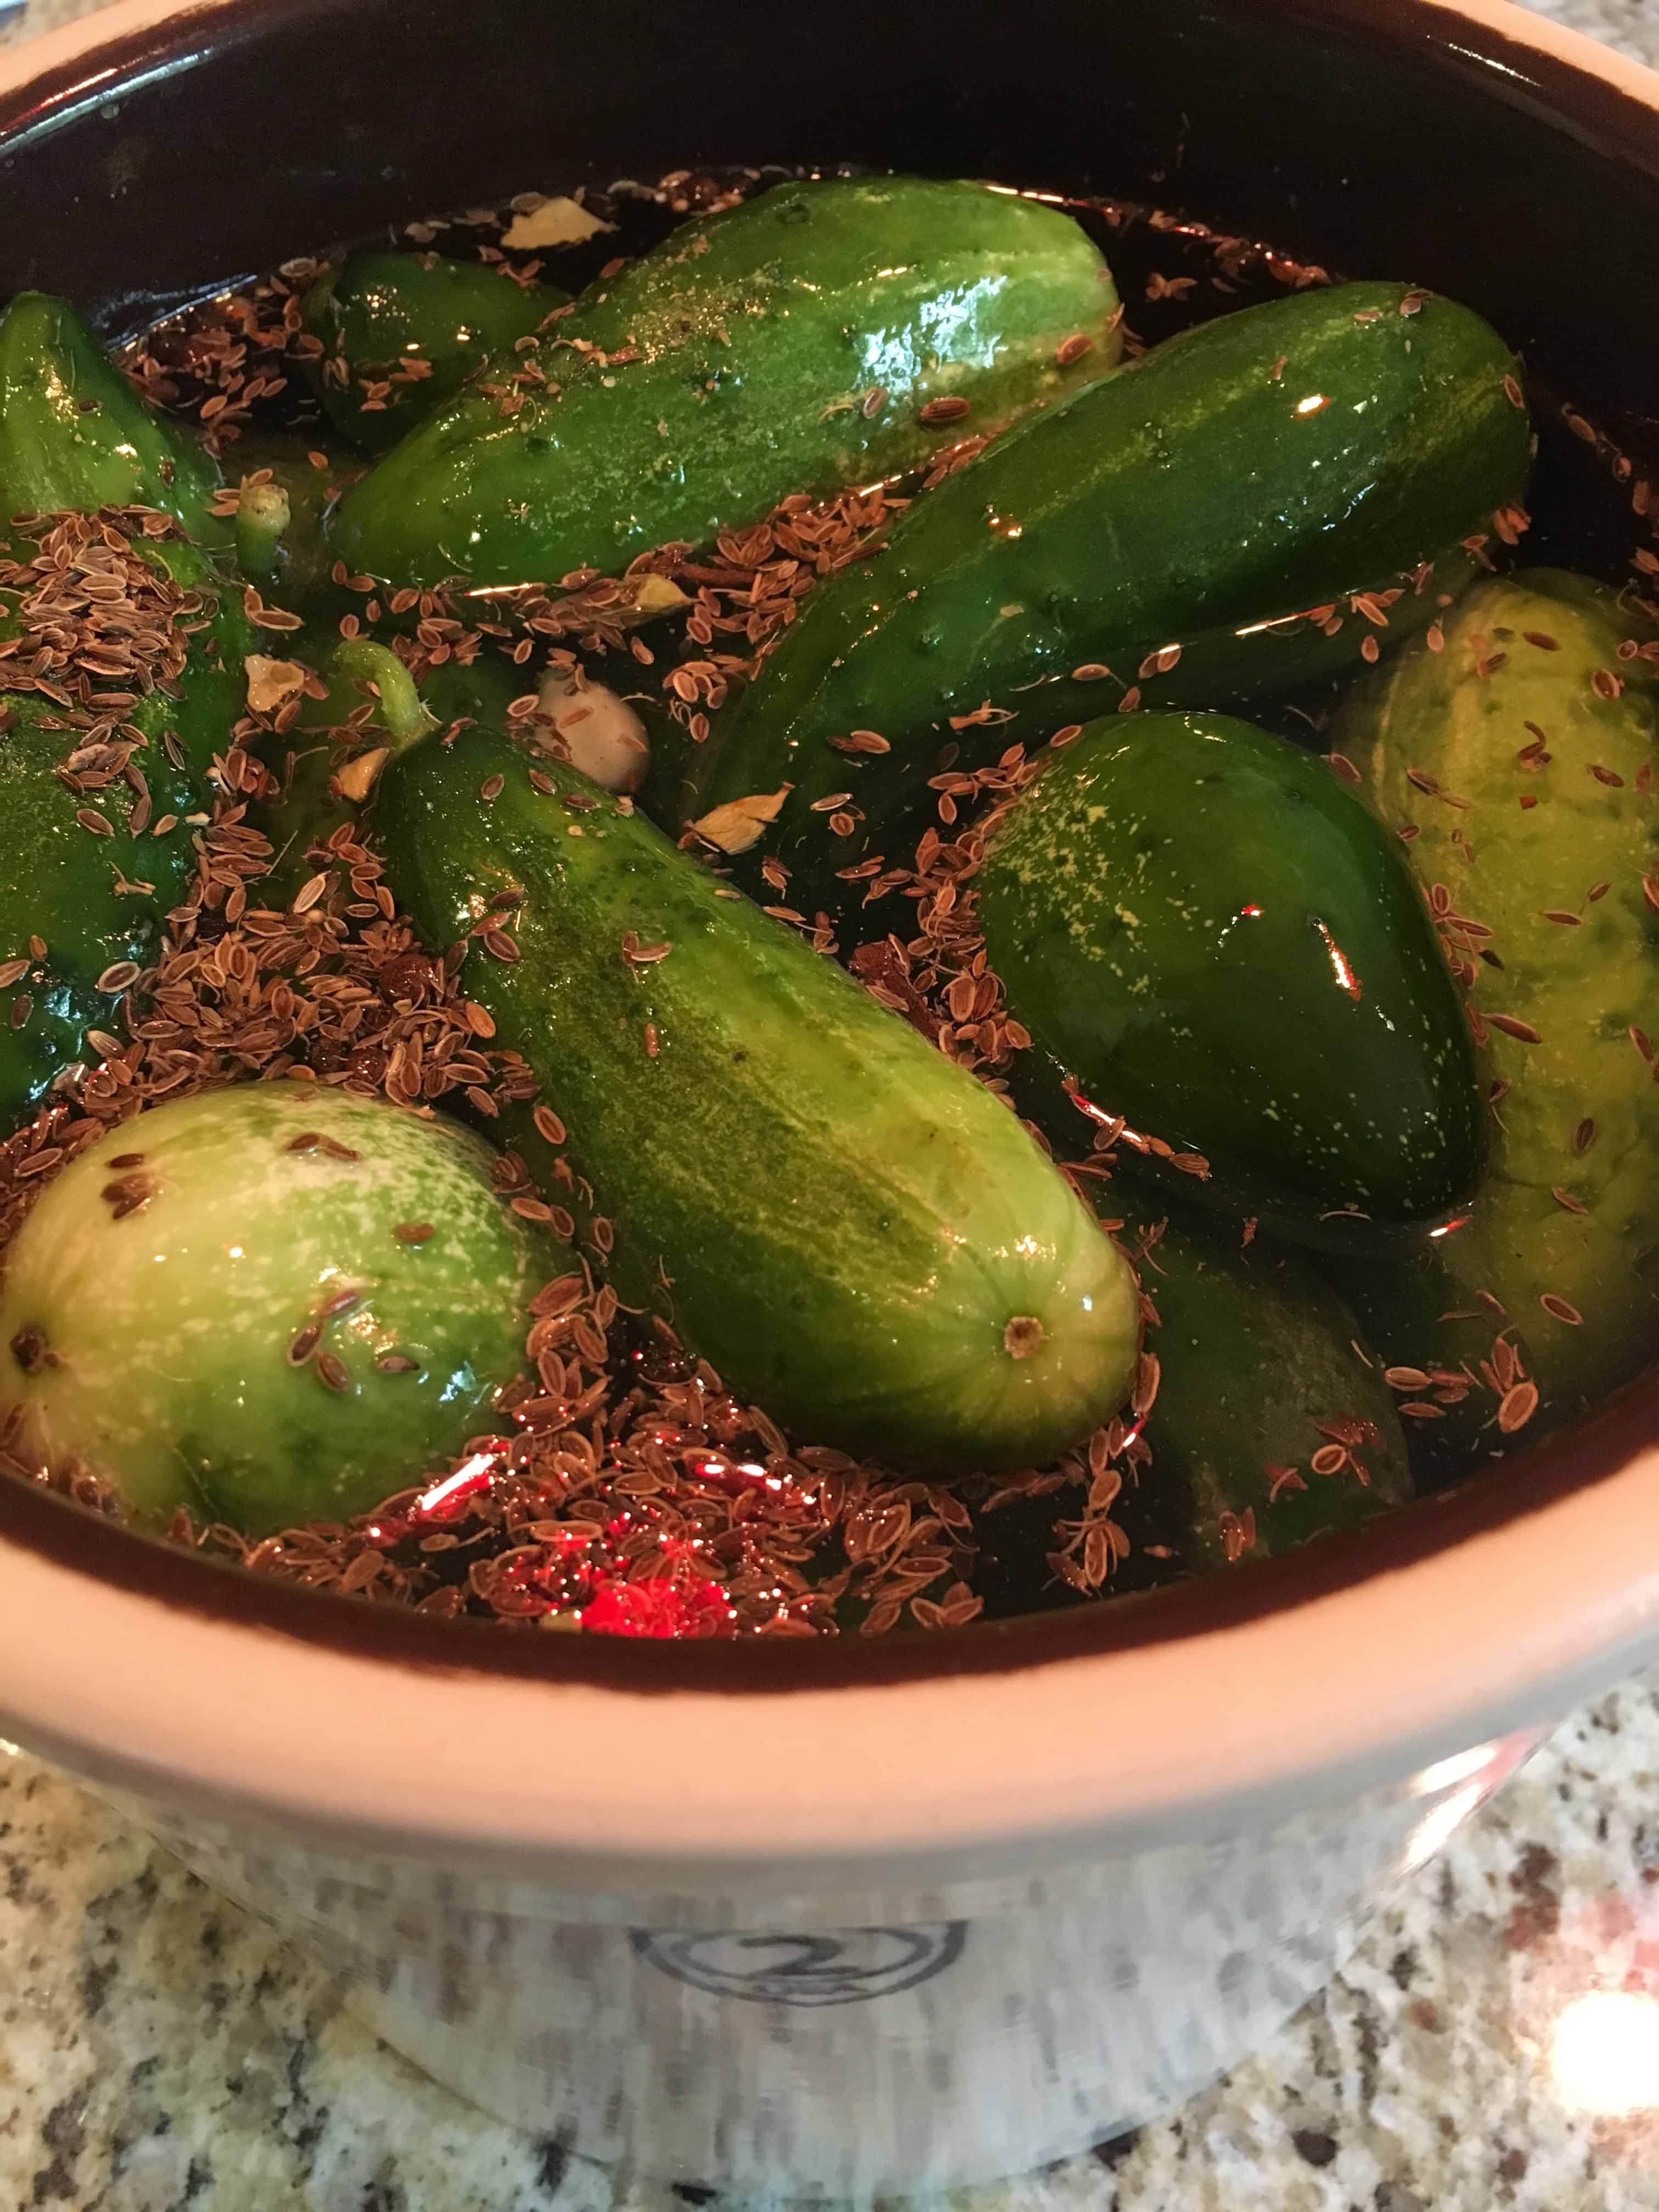 Pickling cukes in crock full of brine and spices. https://trimazing.com